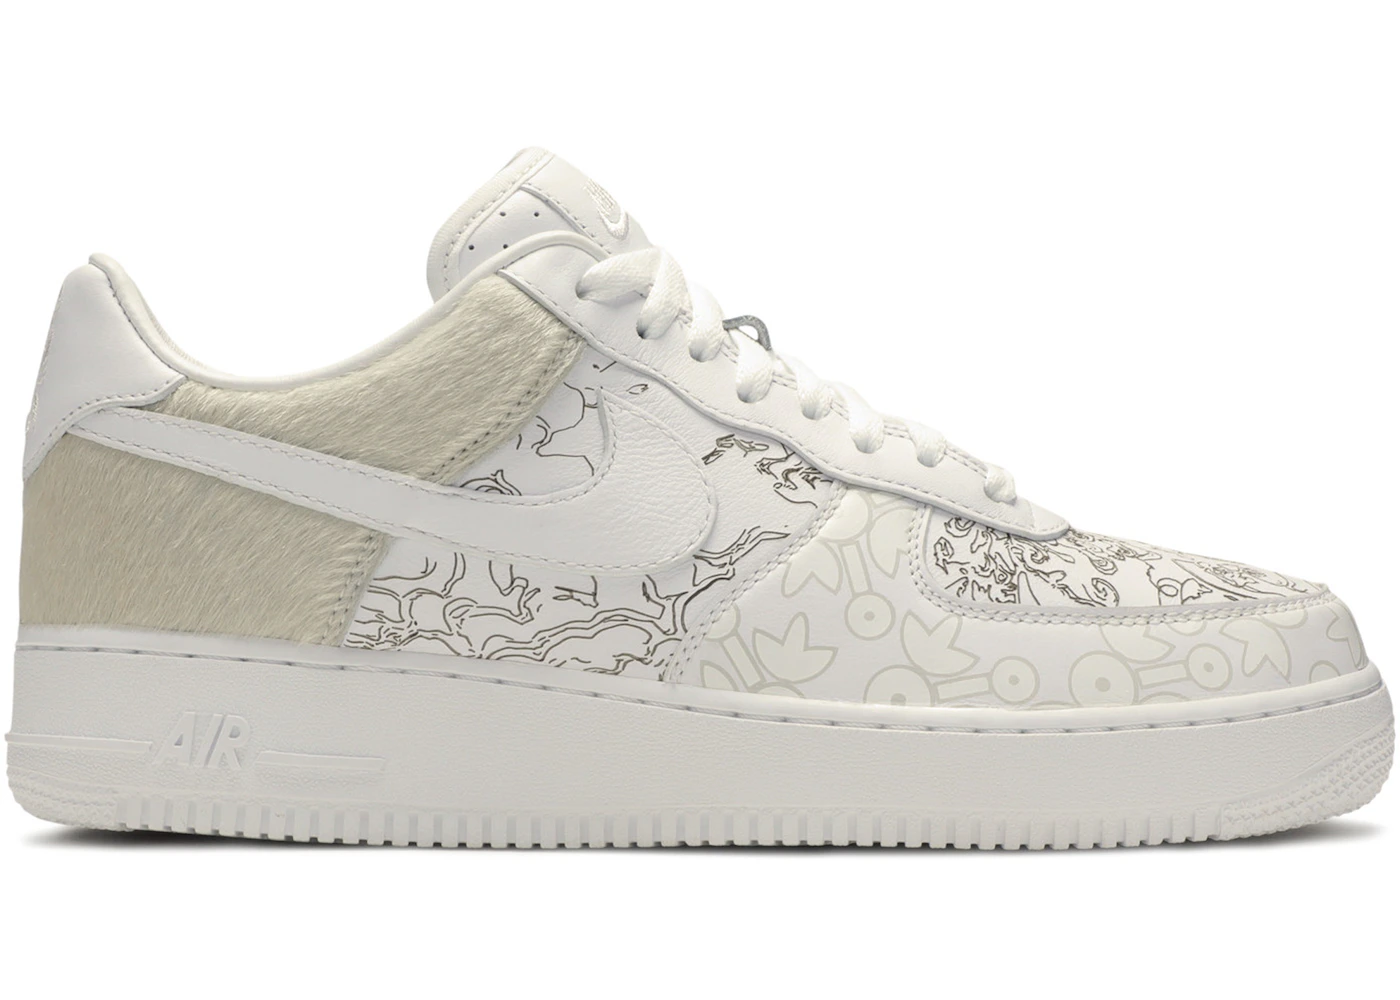 Nike Air Force 1 Low Year of the Dog (2018)